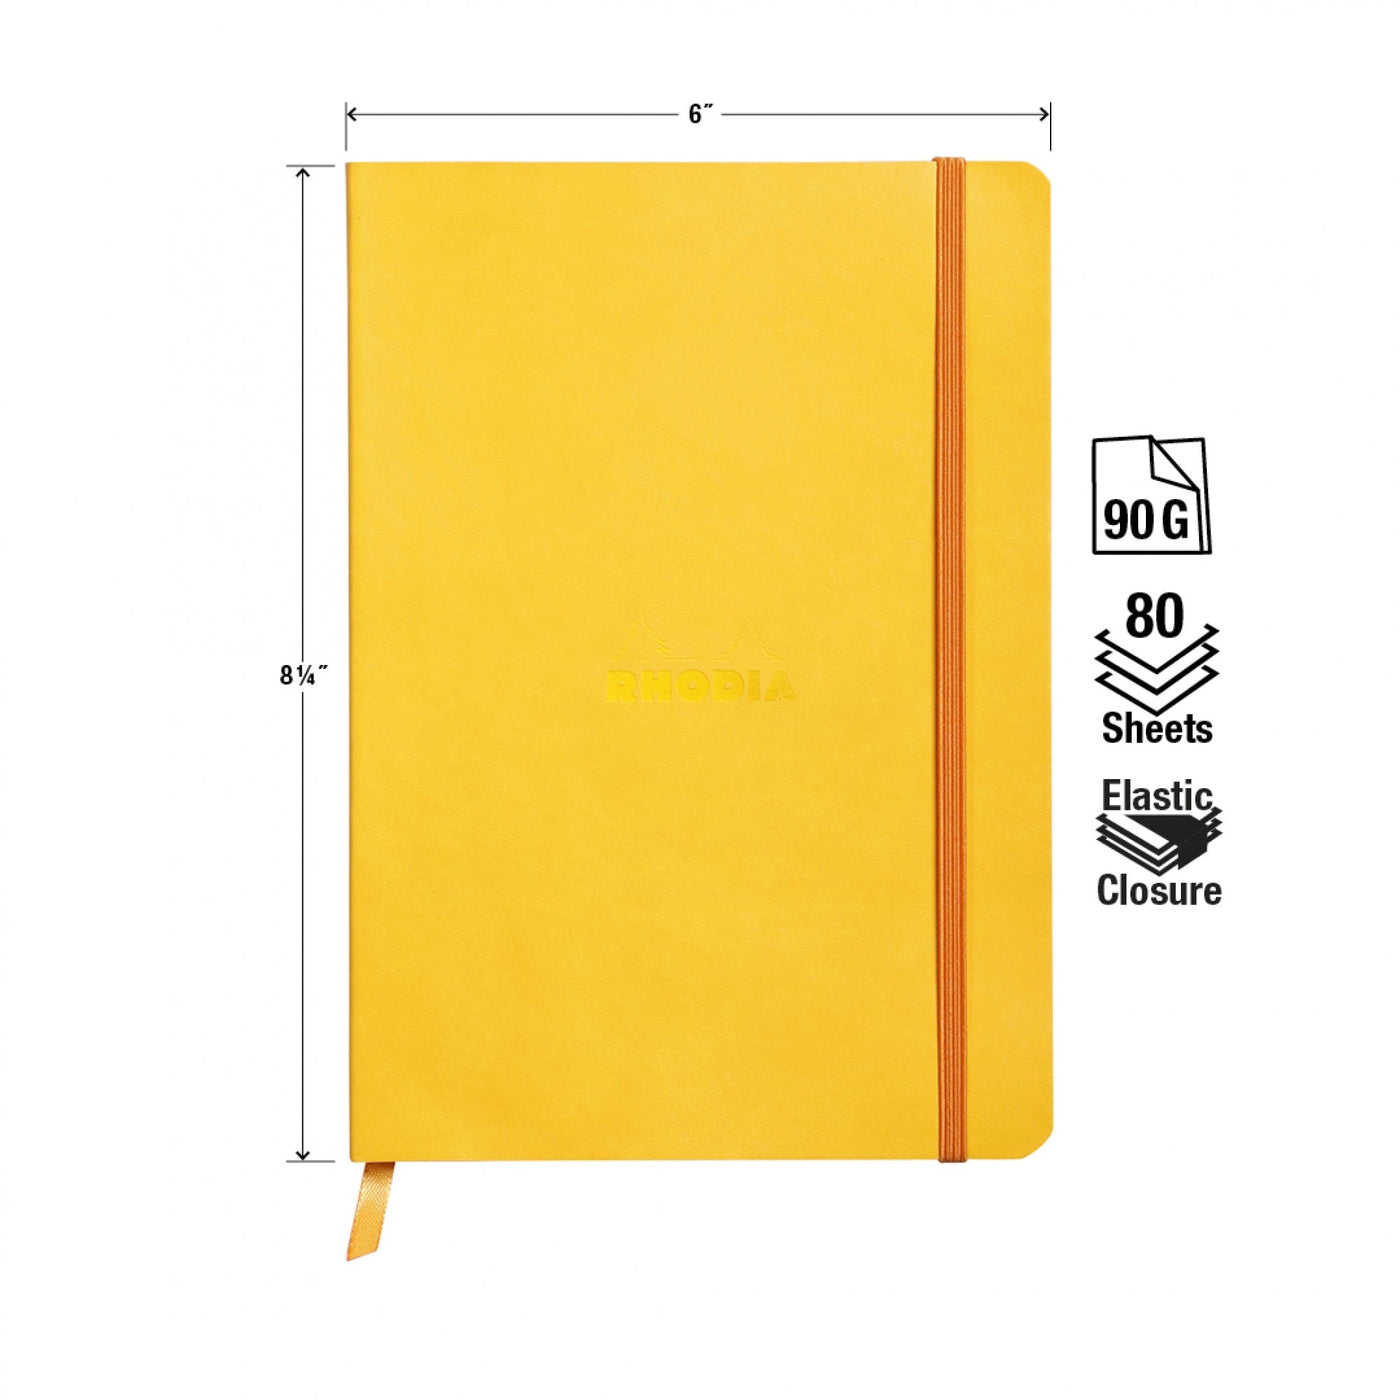 Rhodia Rhodiarama Soft Cover A5 Yellow Lined Notebook Measurements